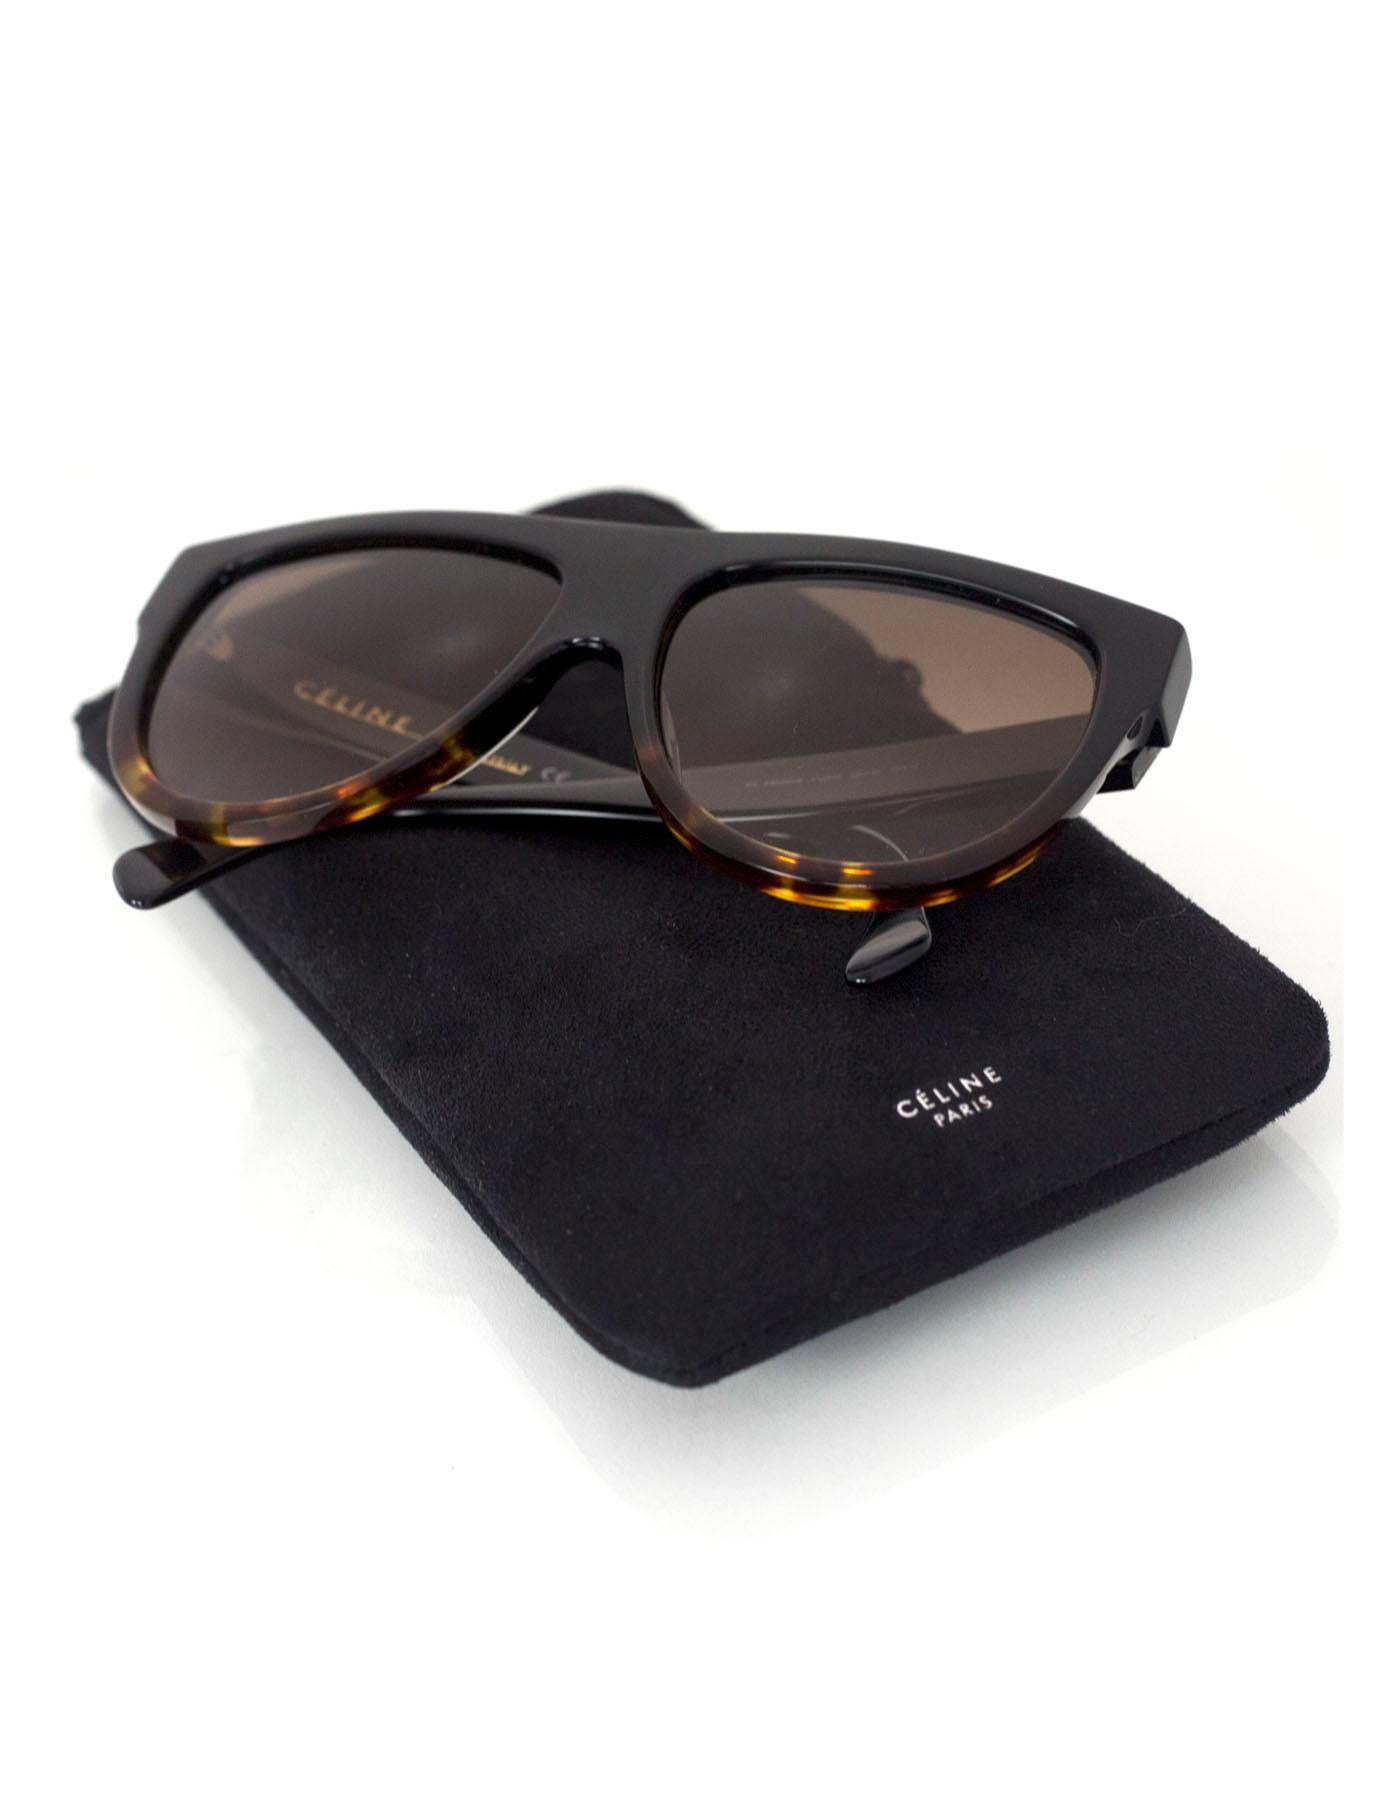 Celine Shadow Flat Top Sunglasses with Case 1